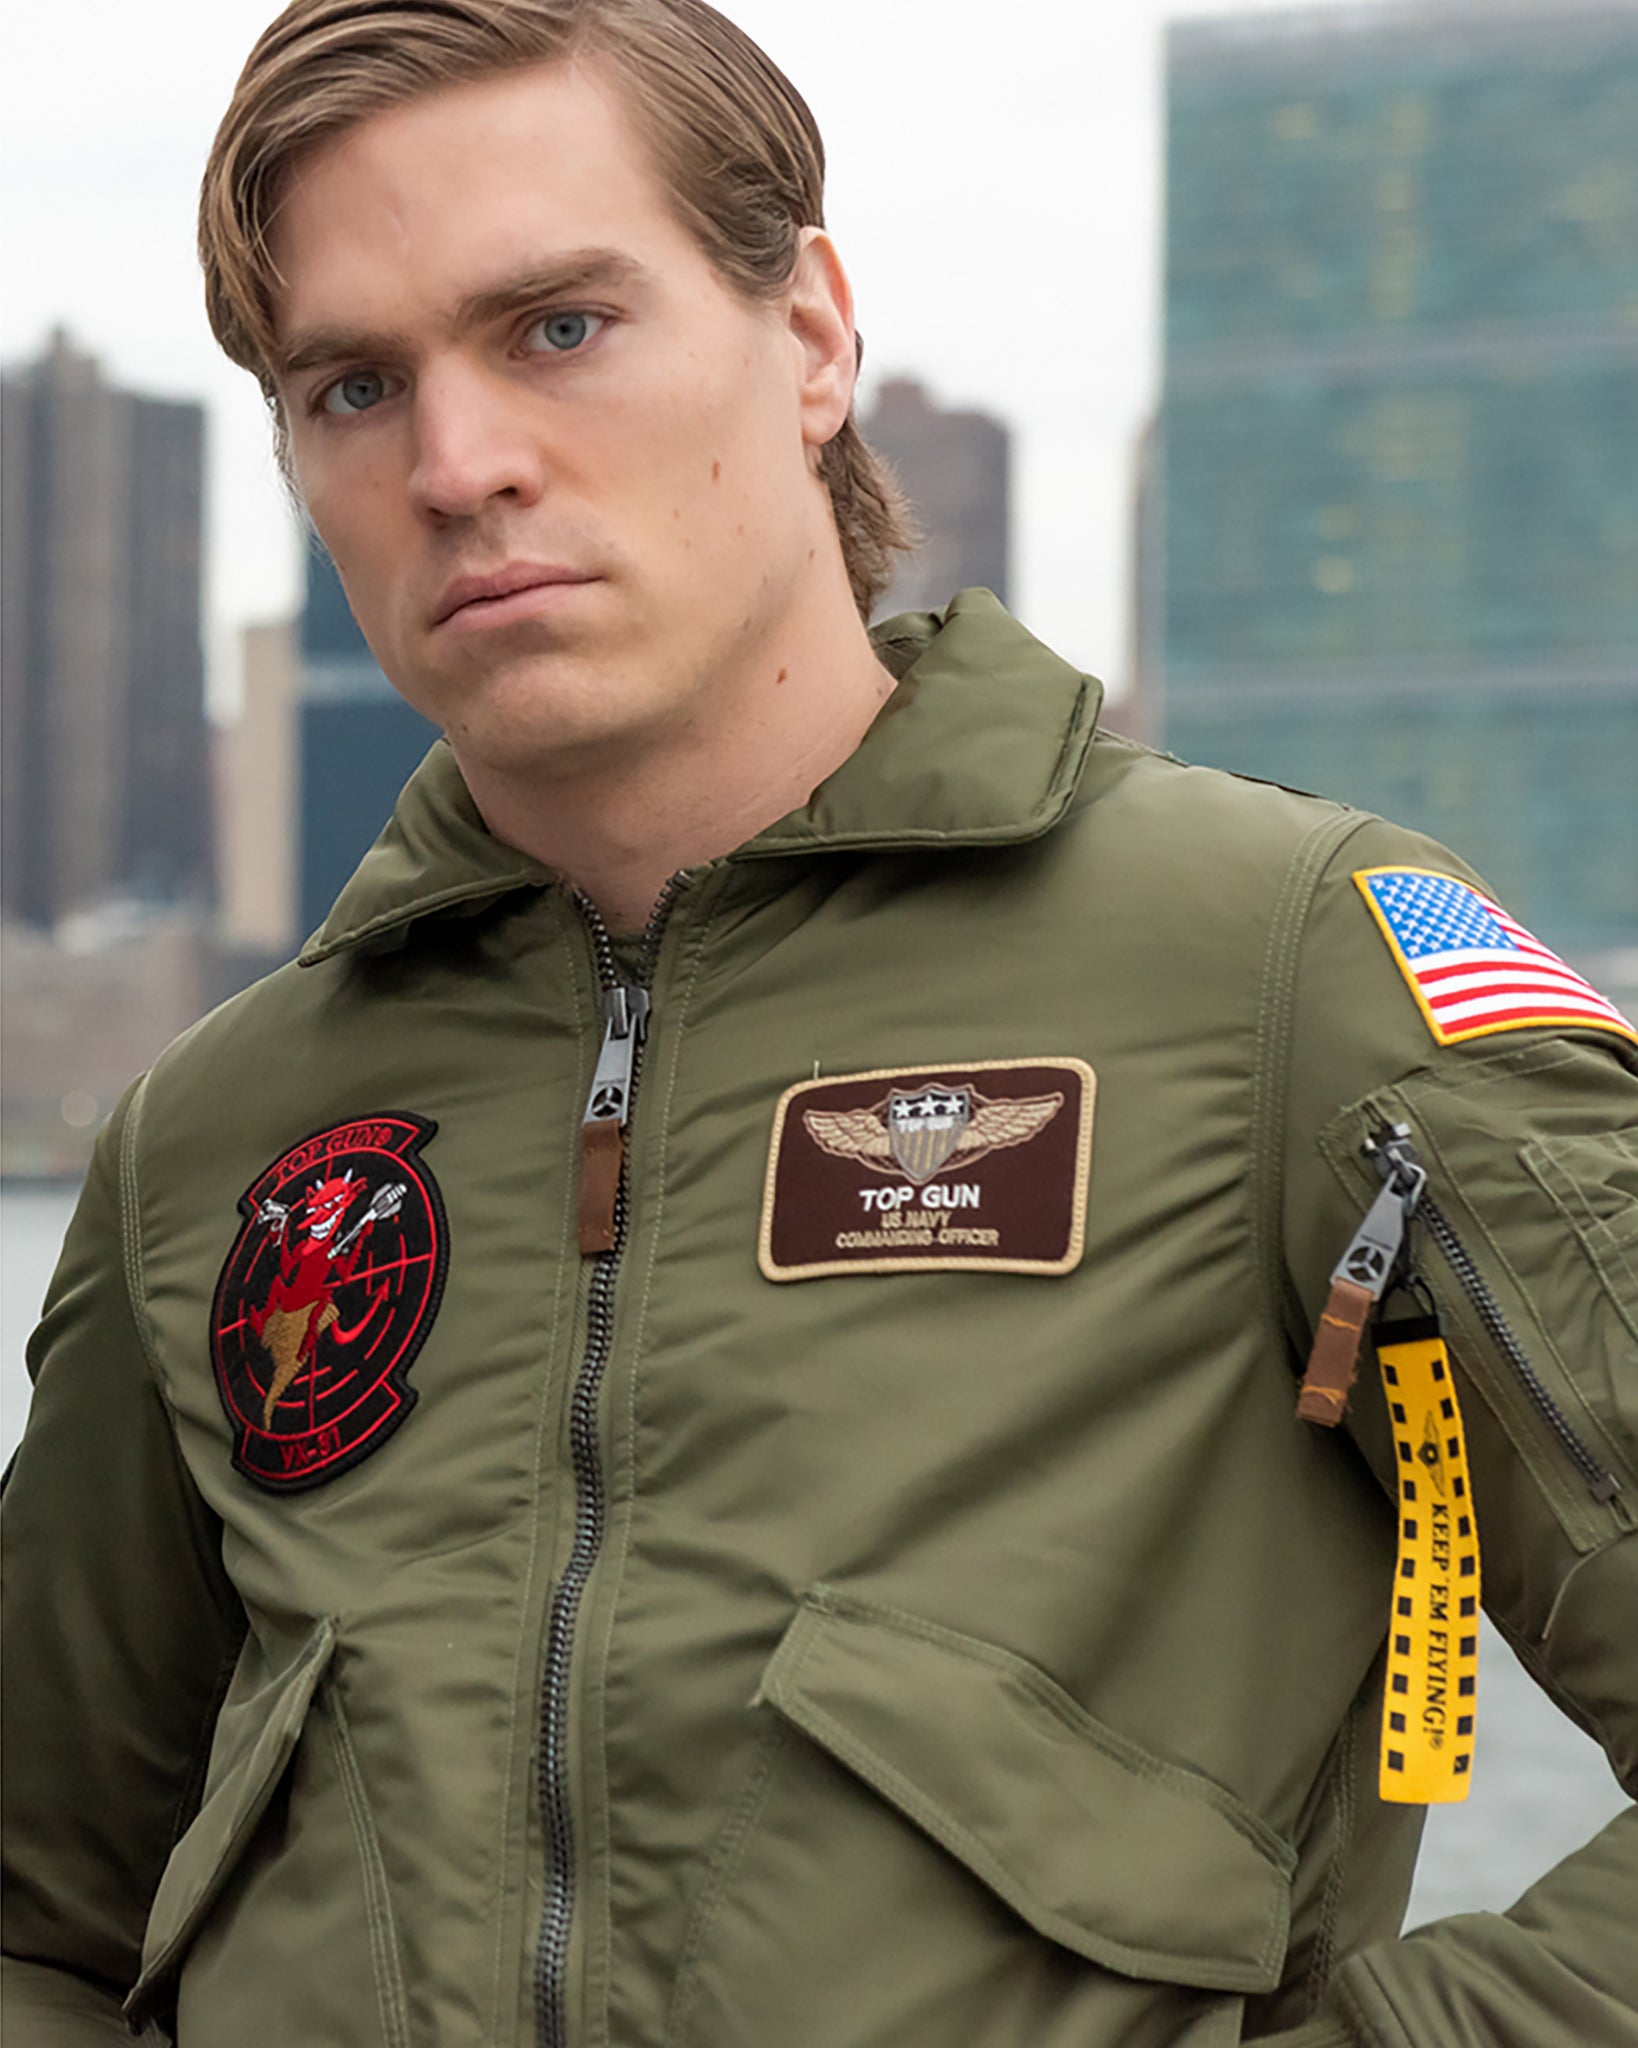 TOP GUN® CWU-45 FLIGHT JACKET WITH PATCHES - THE OFFICIAL TOP GUN 